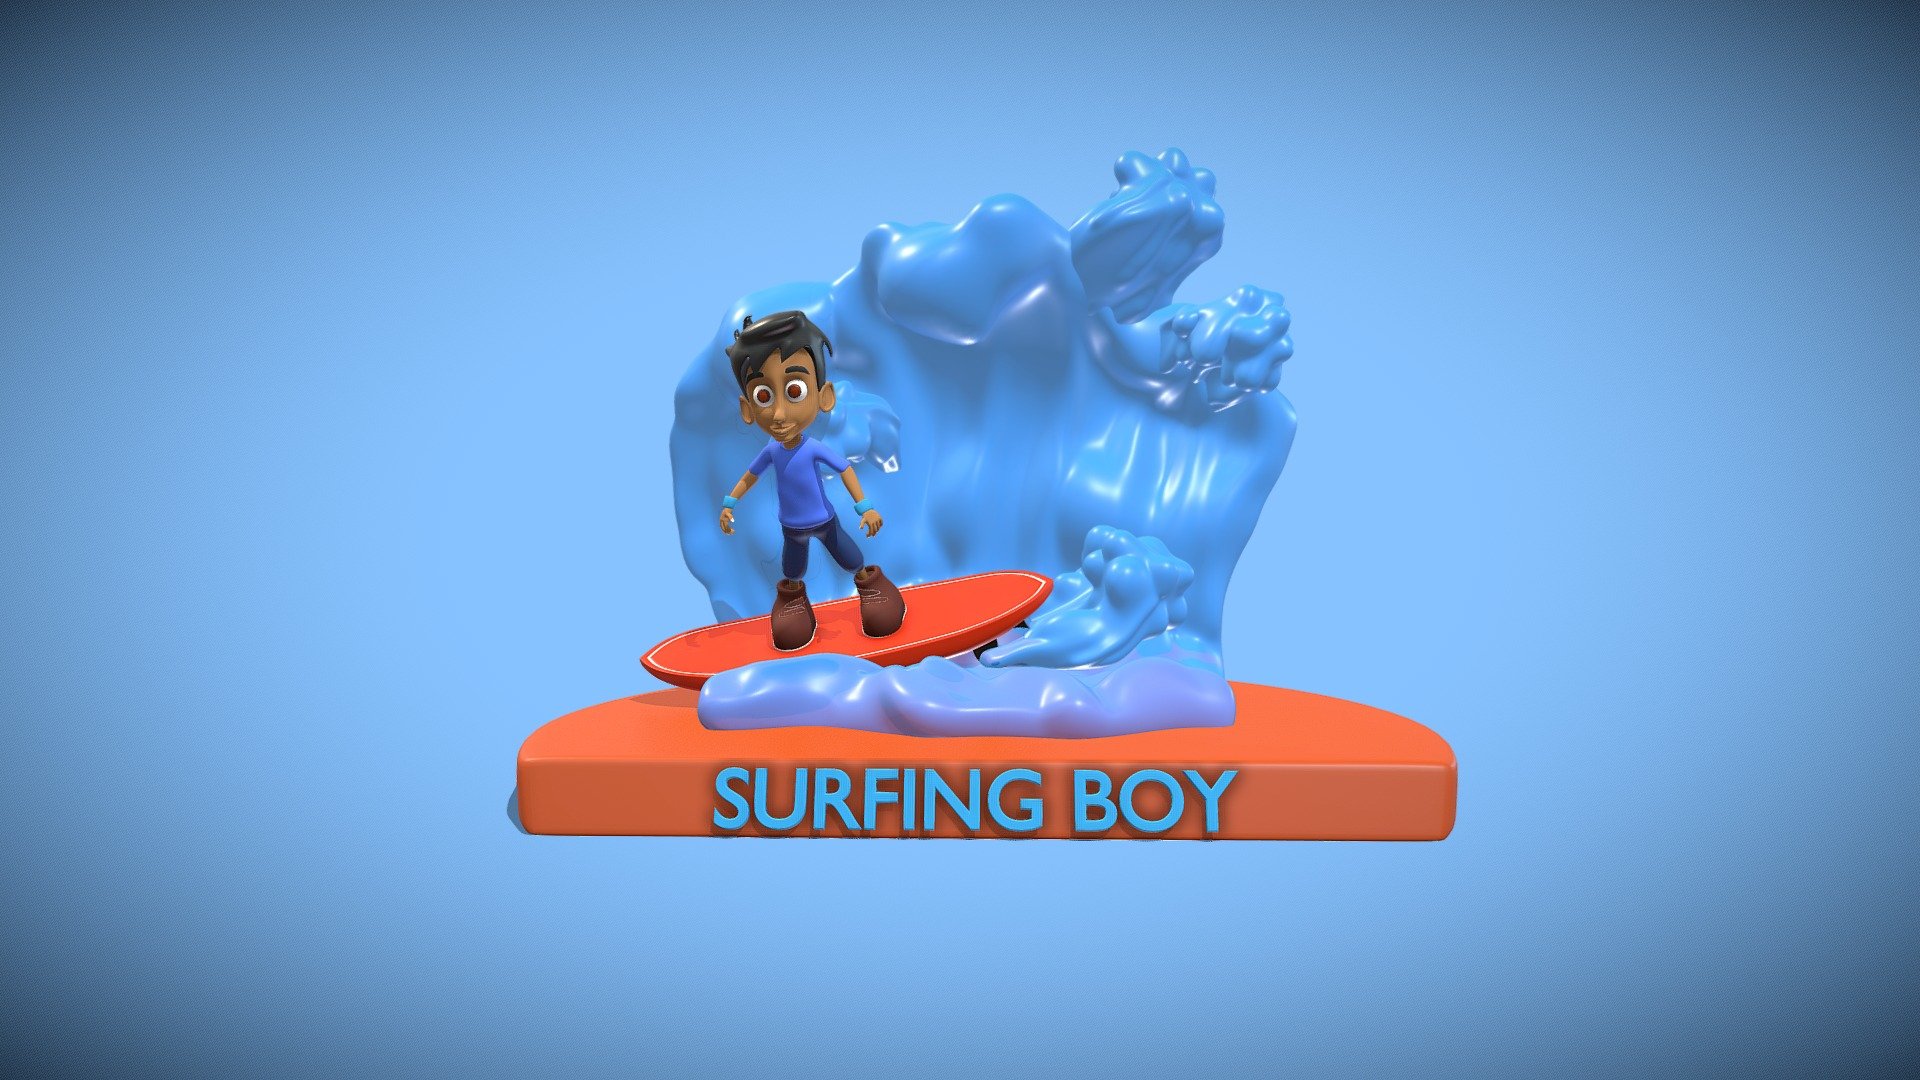 Surfing Boy modeled in blender 2.83 and rendered in cycles.

3D Printable and Scalable Model.

Model Size :-
Length : 17 cm,
Width : 13 cm,
Height : 13 cm.

Statistics :-
Verts : 429928,
Faces : 429868,
Tris : 859736 3d model